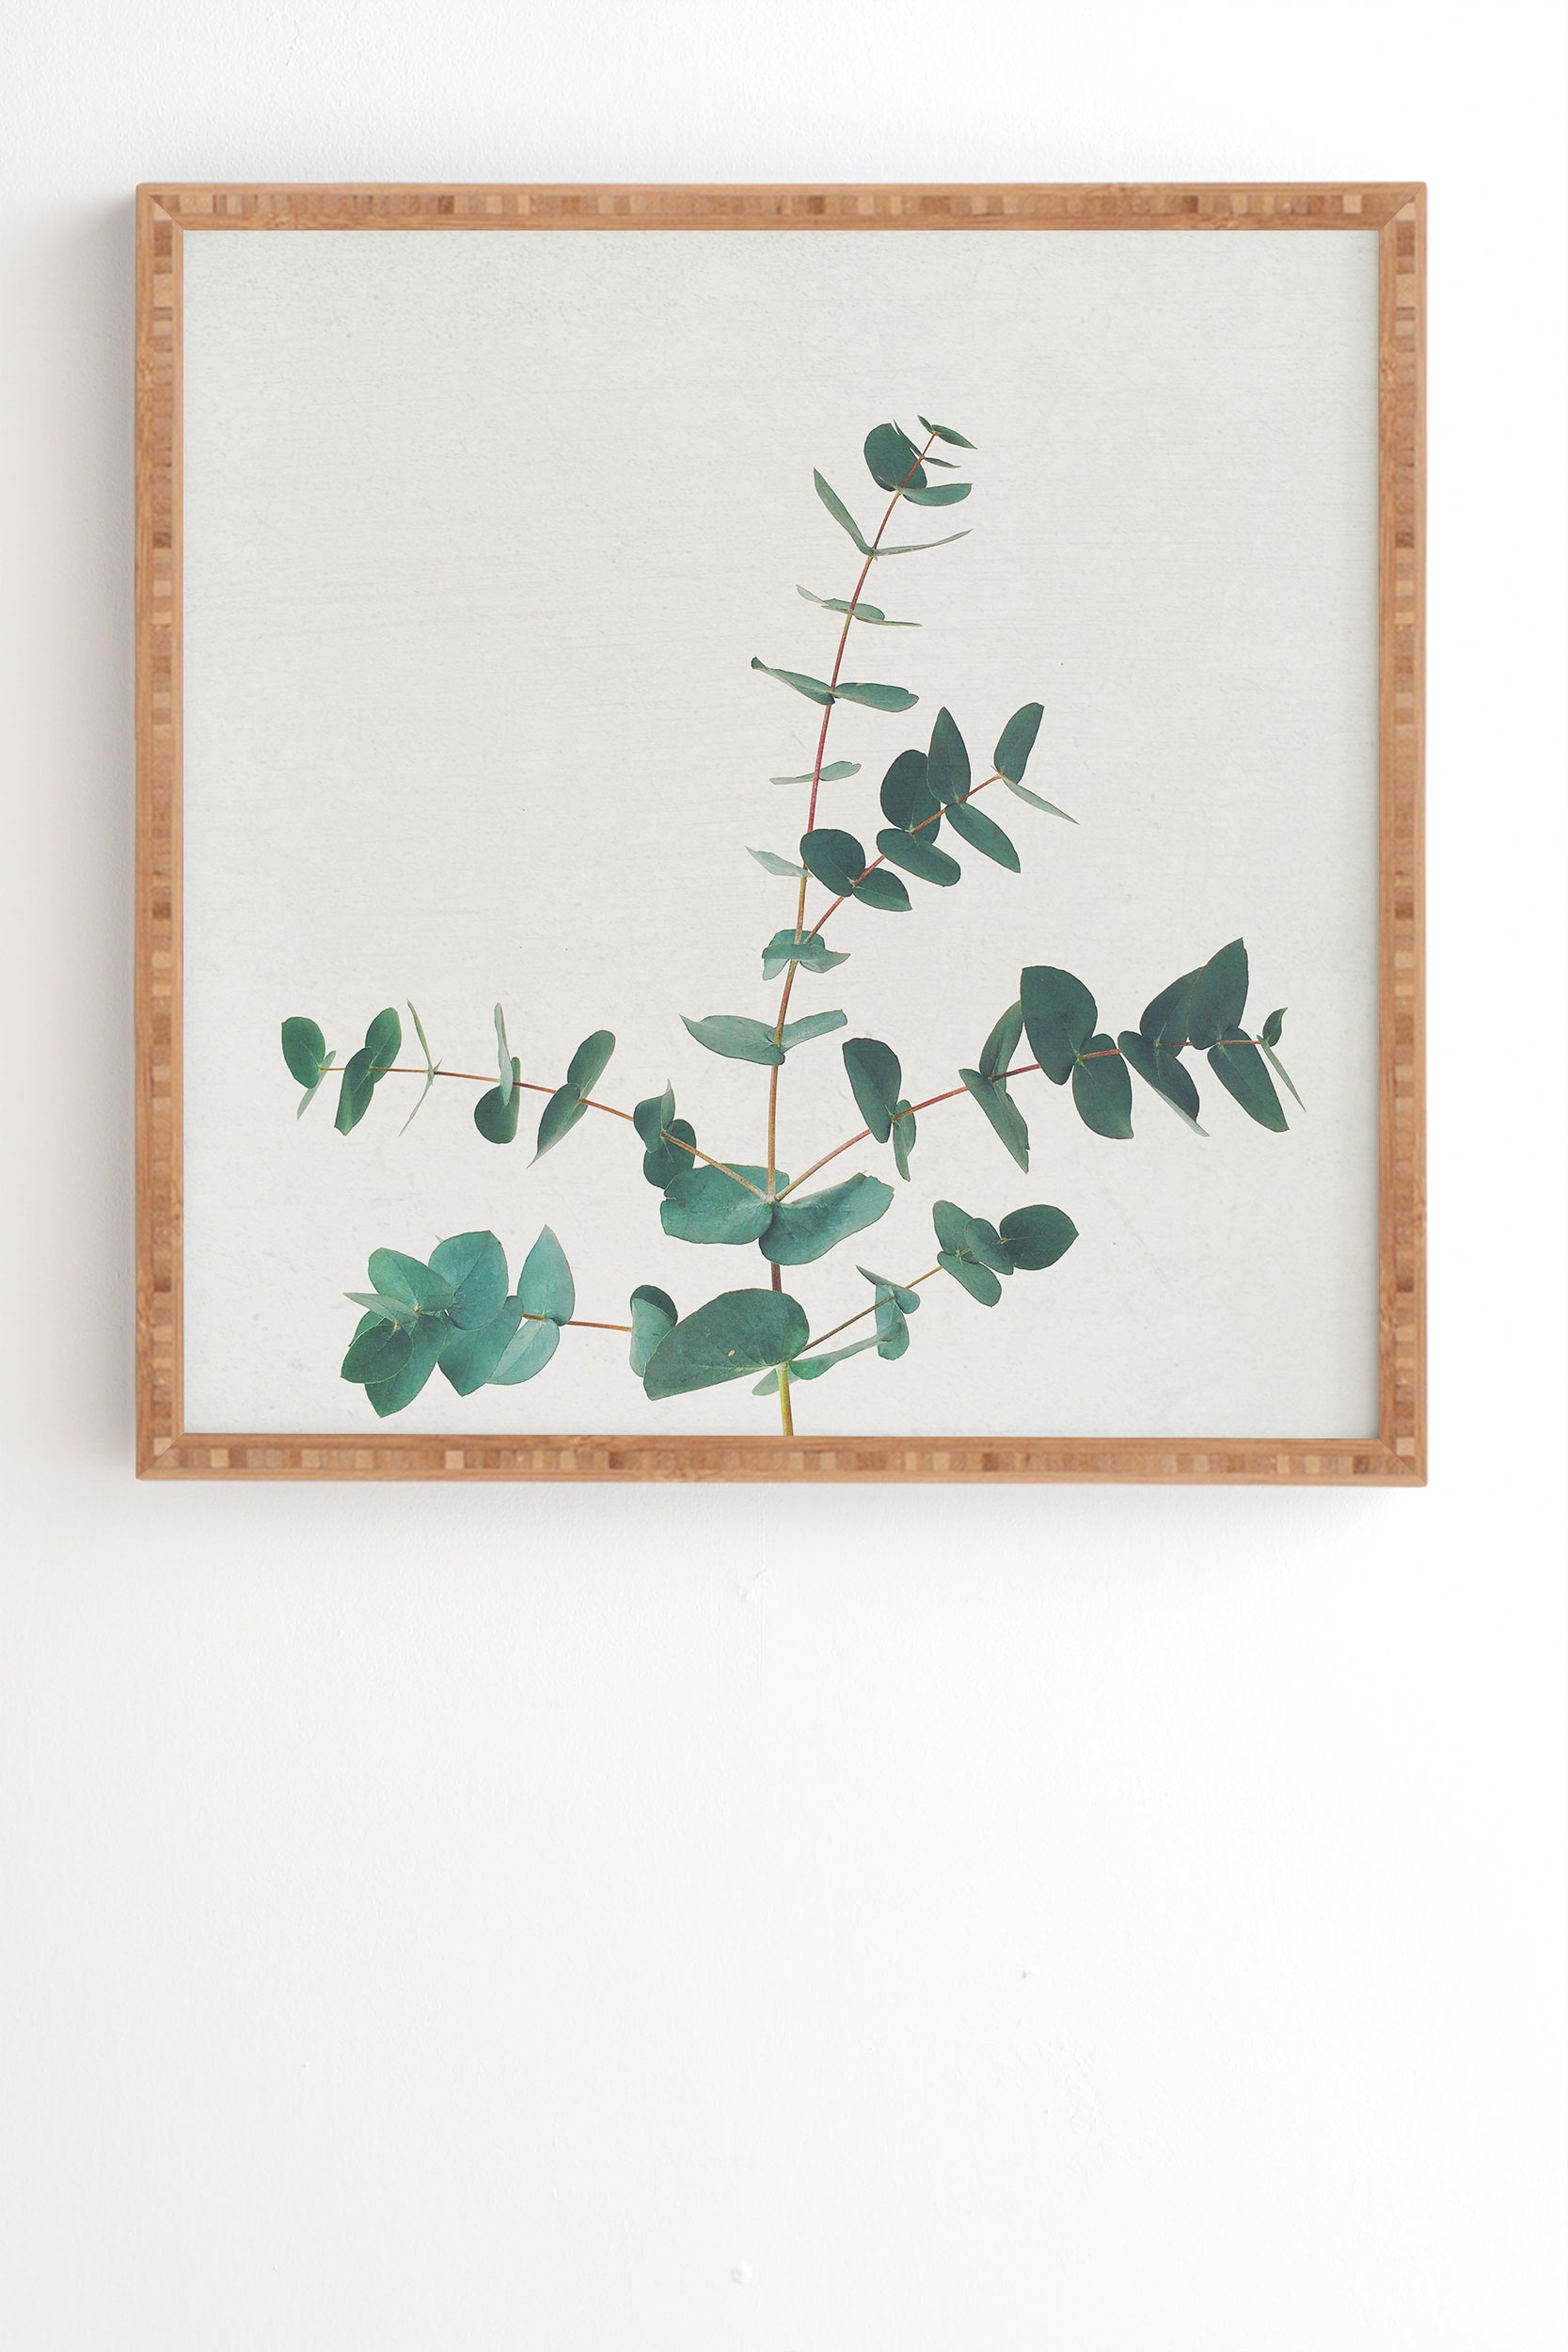 The Eucalyptus by Cassia Beck - Framed Wall Art Bamboo 19" x 22.4" - Image 1